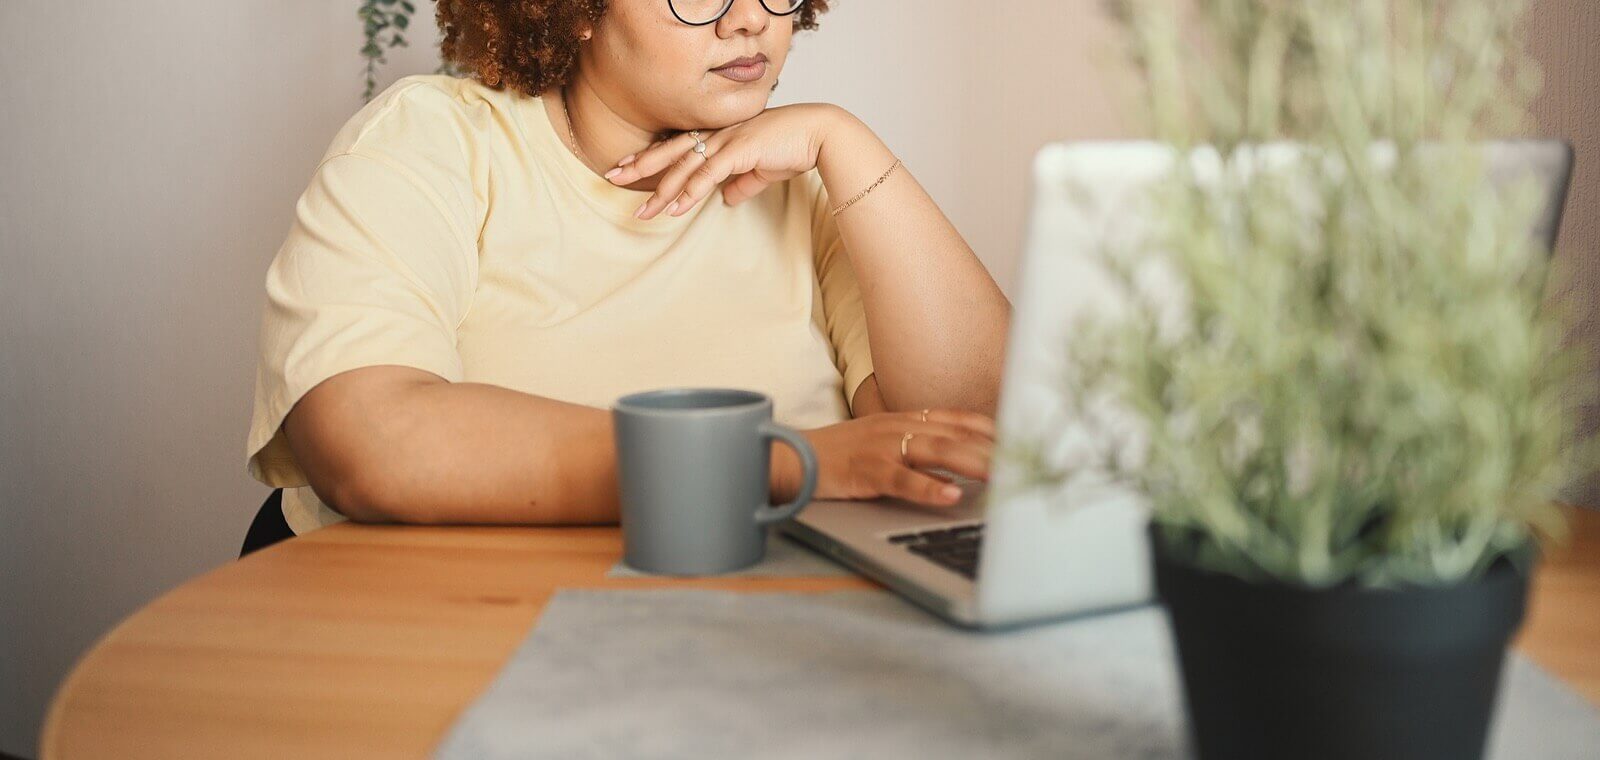 A woman sits at a table while looking at her laptop. Looking for Online Therapy in Austin, TX? Speak with an online therapist in texas to see if it is right for you!